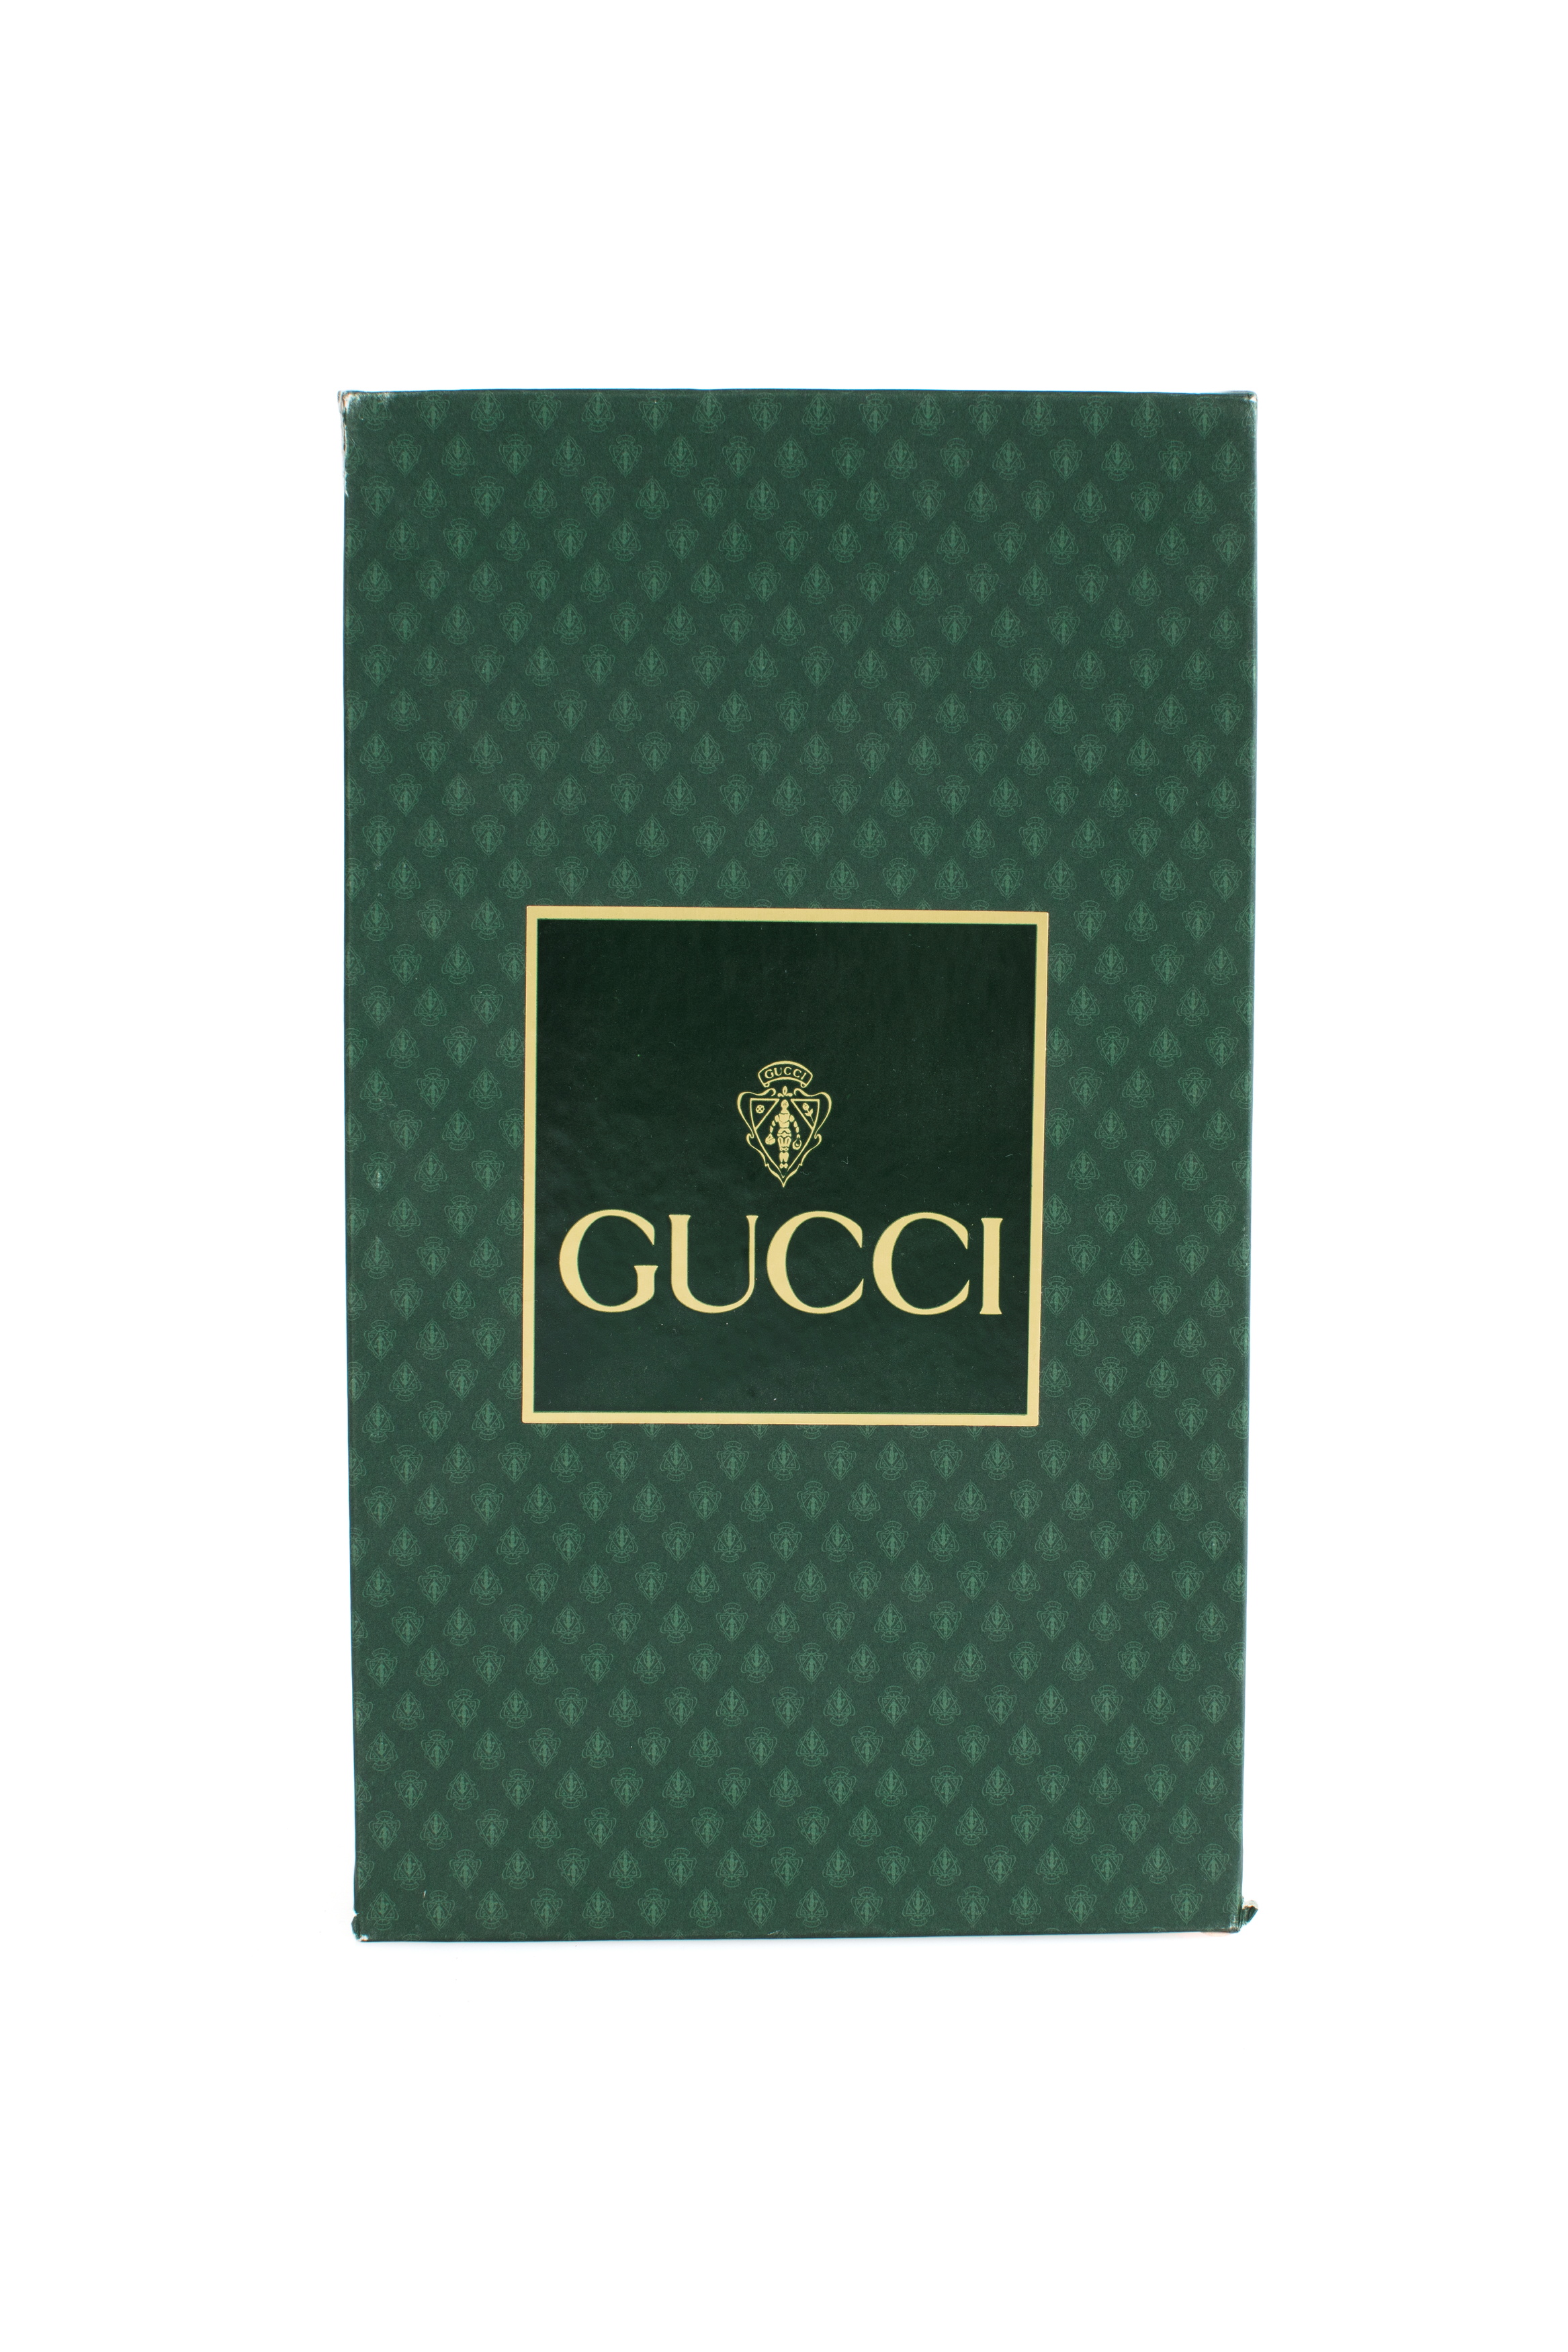 Powerhouse Collection - Shoe box for Gucci shoes